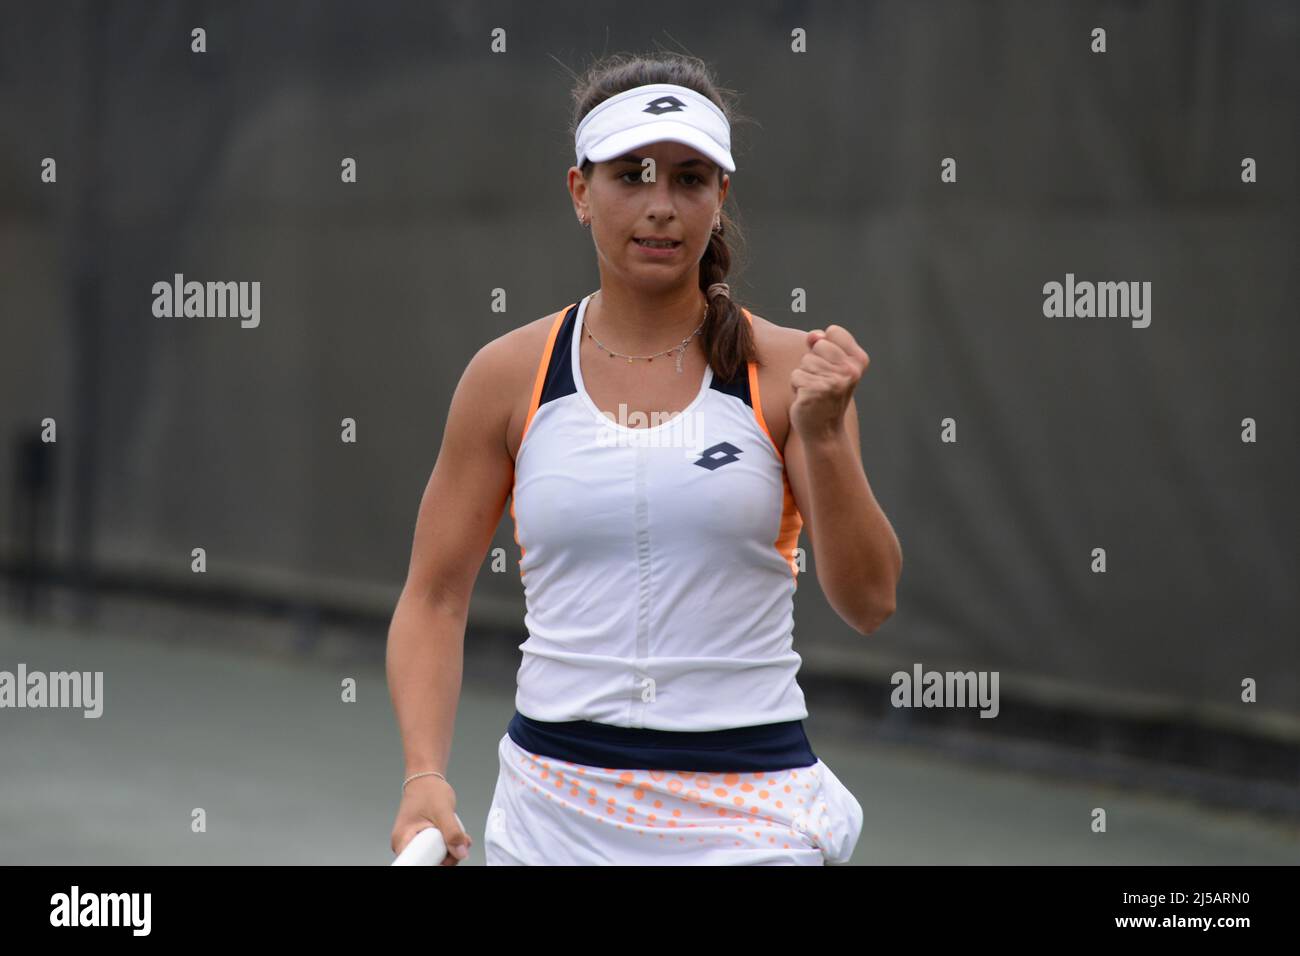 Charlottesville, Virginia, USA. 21st Apr, 2022. LUCREZIA STEFANINI of Italy  in her second round match in the Boar's Head Resort Women's Open tennis  tournament in Charlottesville Virginia. (Credit Image: © Christopher  Levy/ZUMA